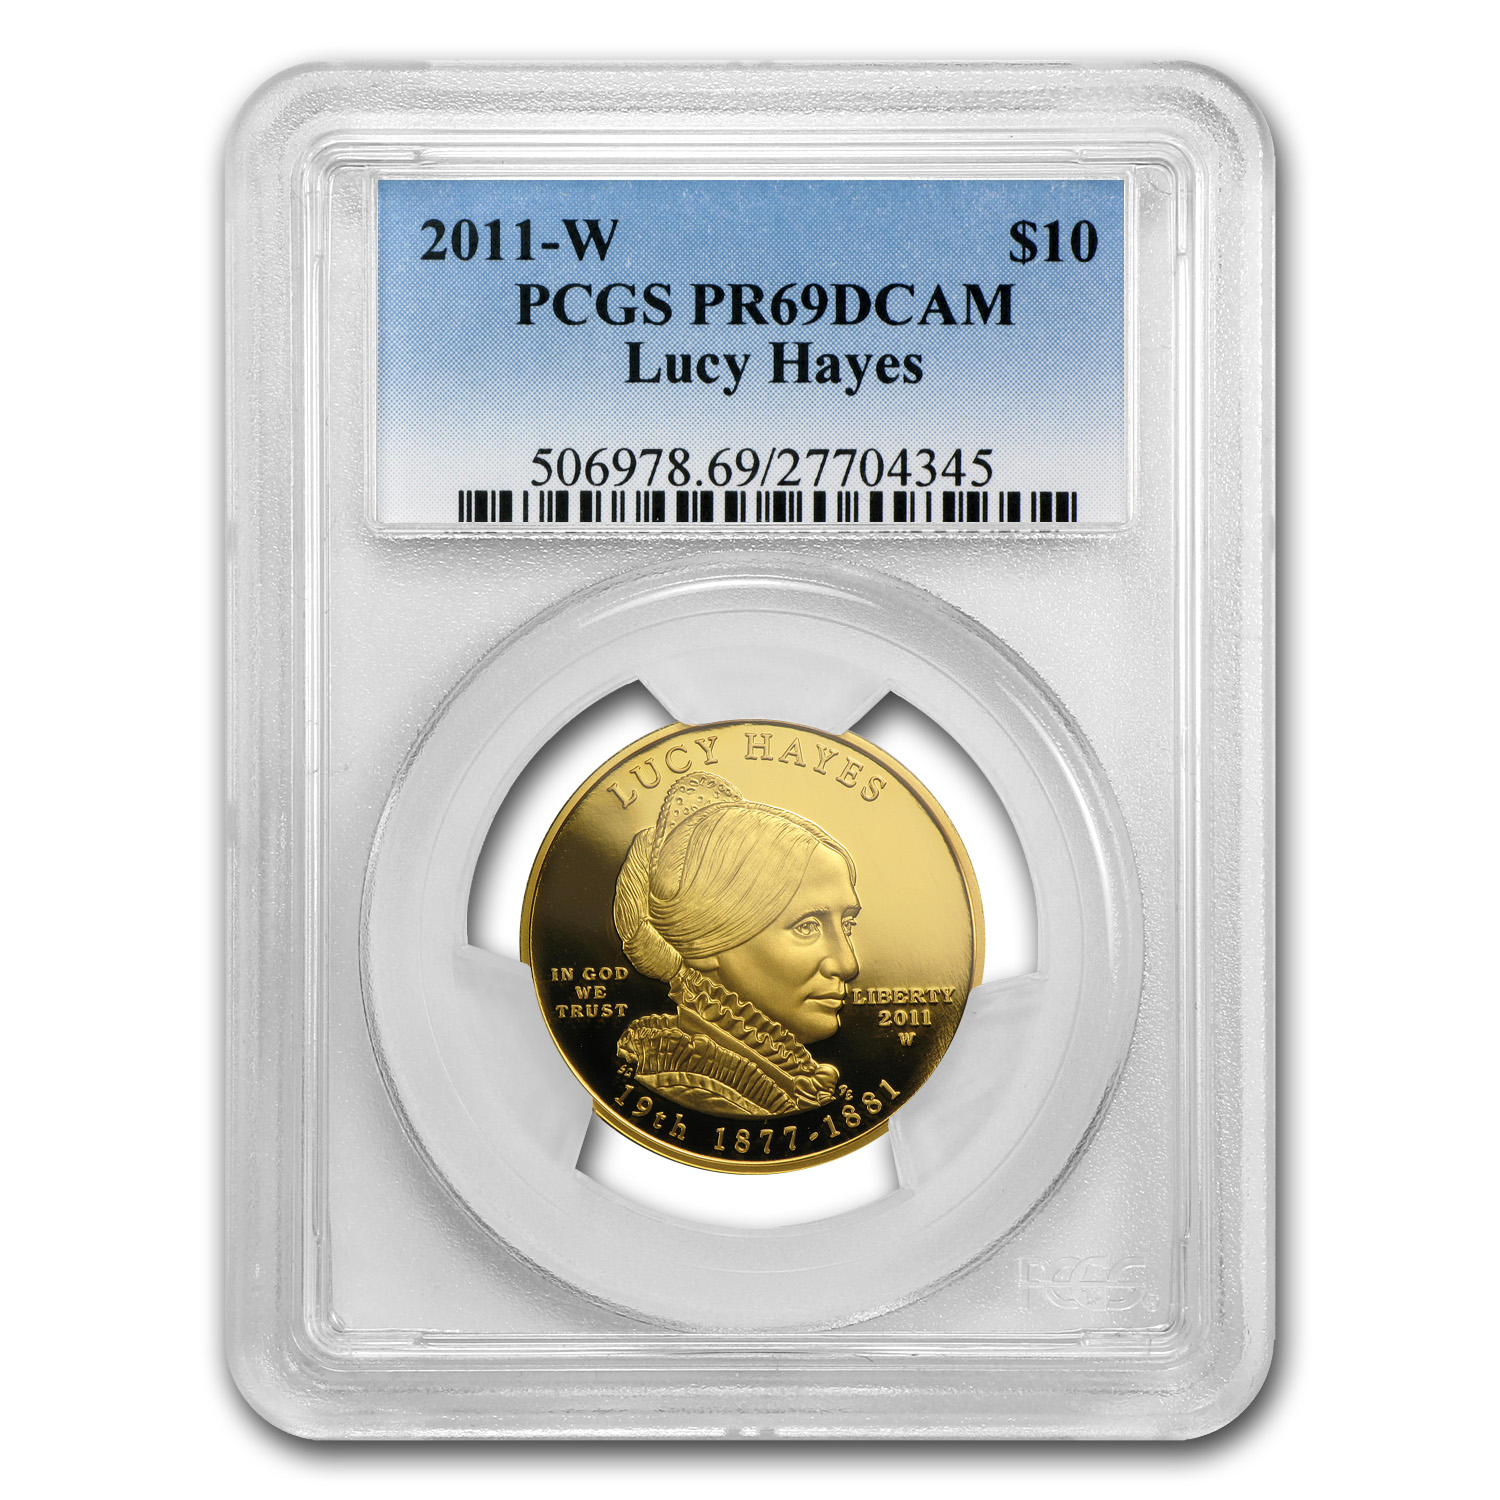 Buy 2011-W 1/2 oz Proof Gold Lucy Hayes PR-69 PCGS